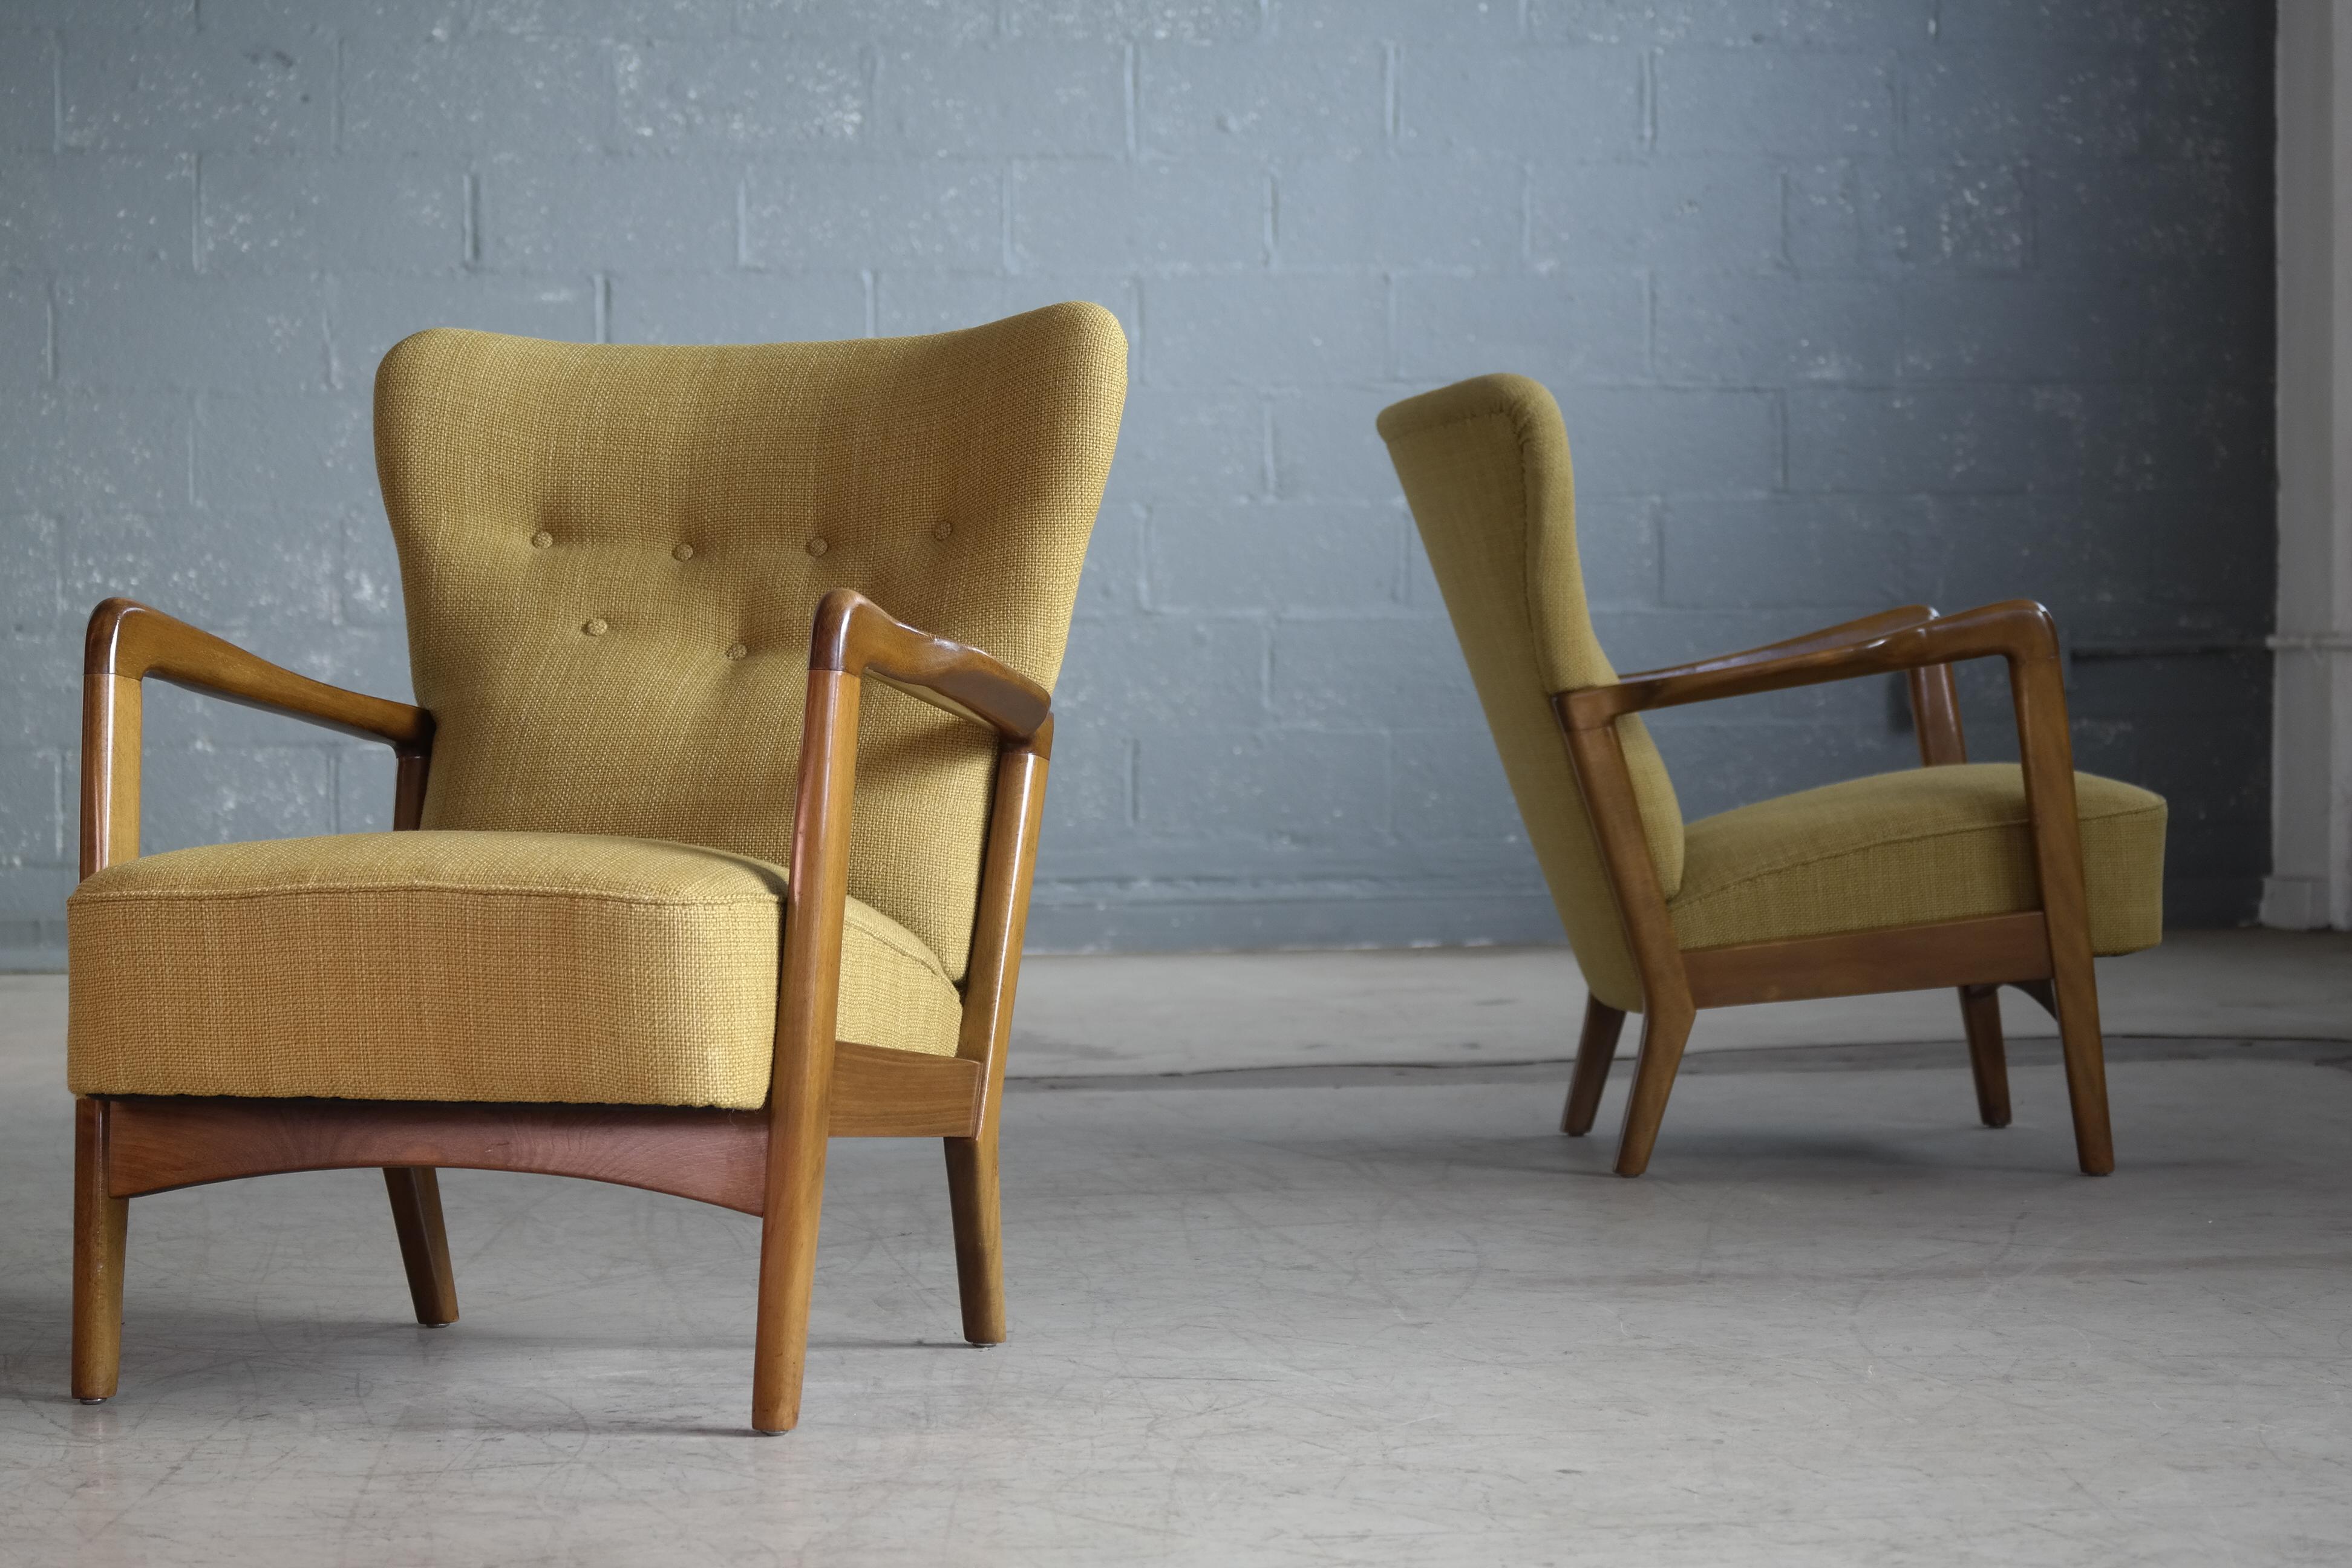 Very stylish open armchairs designed by Soren Hansen for Fritz Hansen in the early 1940s. Mainly made with high backs this set is has lower backrests adding a very cool relaxed and more modern feel to the design. Armrests made of stained and